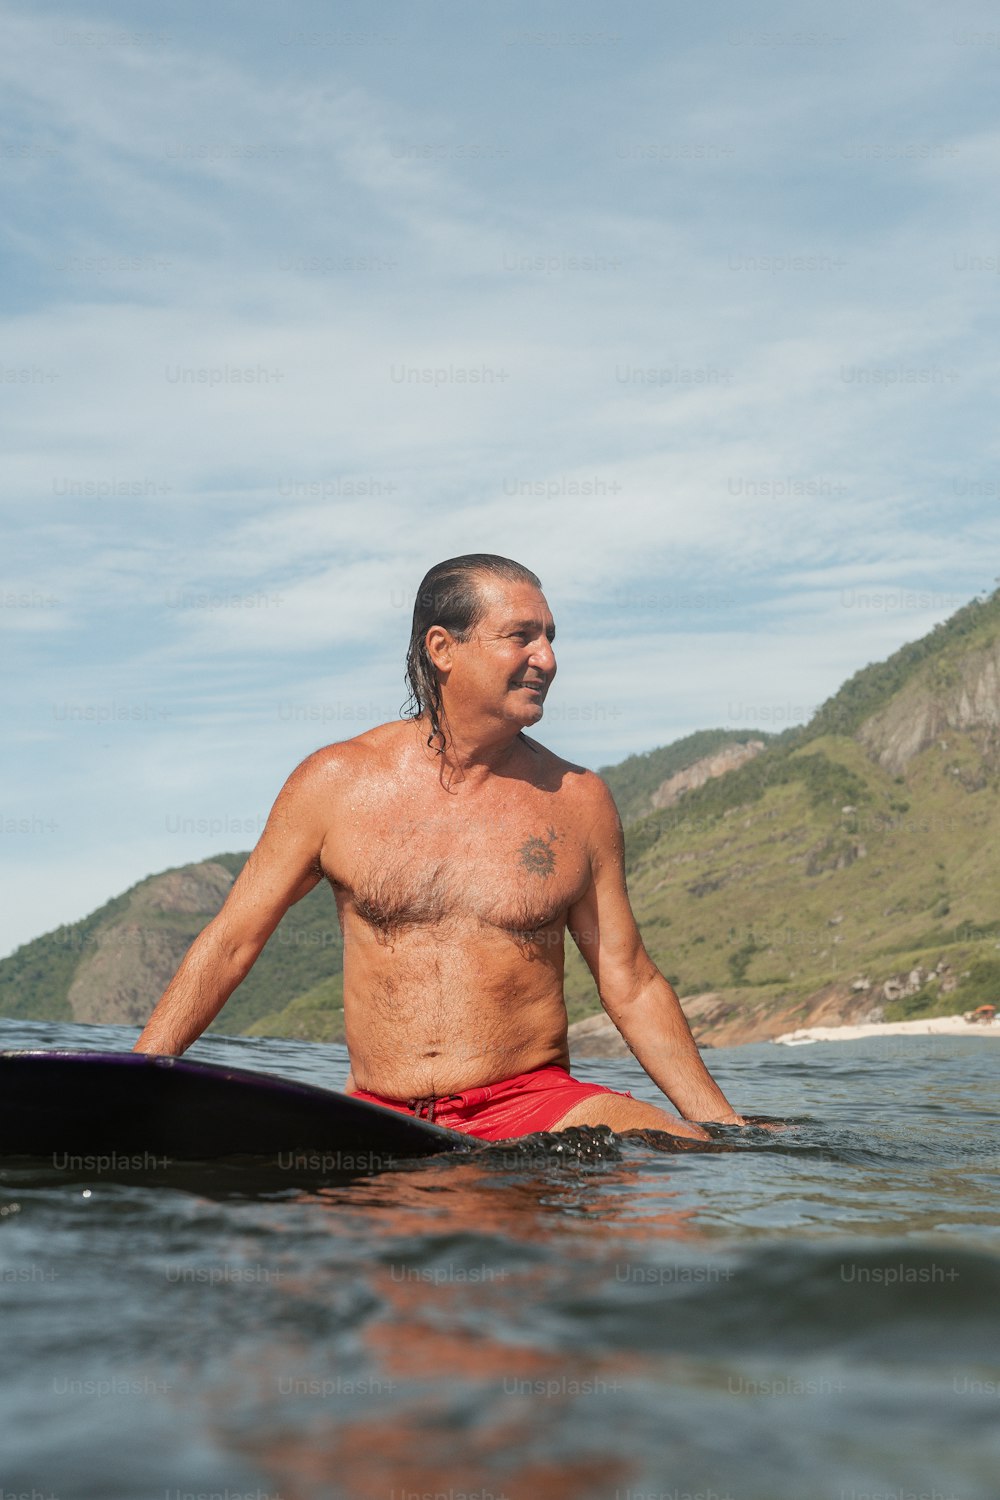 a shirtless man riding a surfboard on a body of water